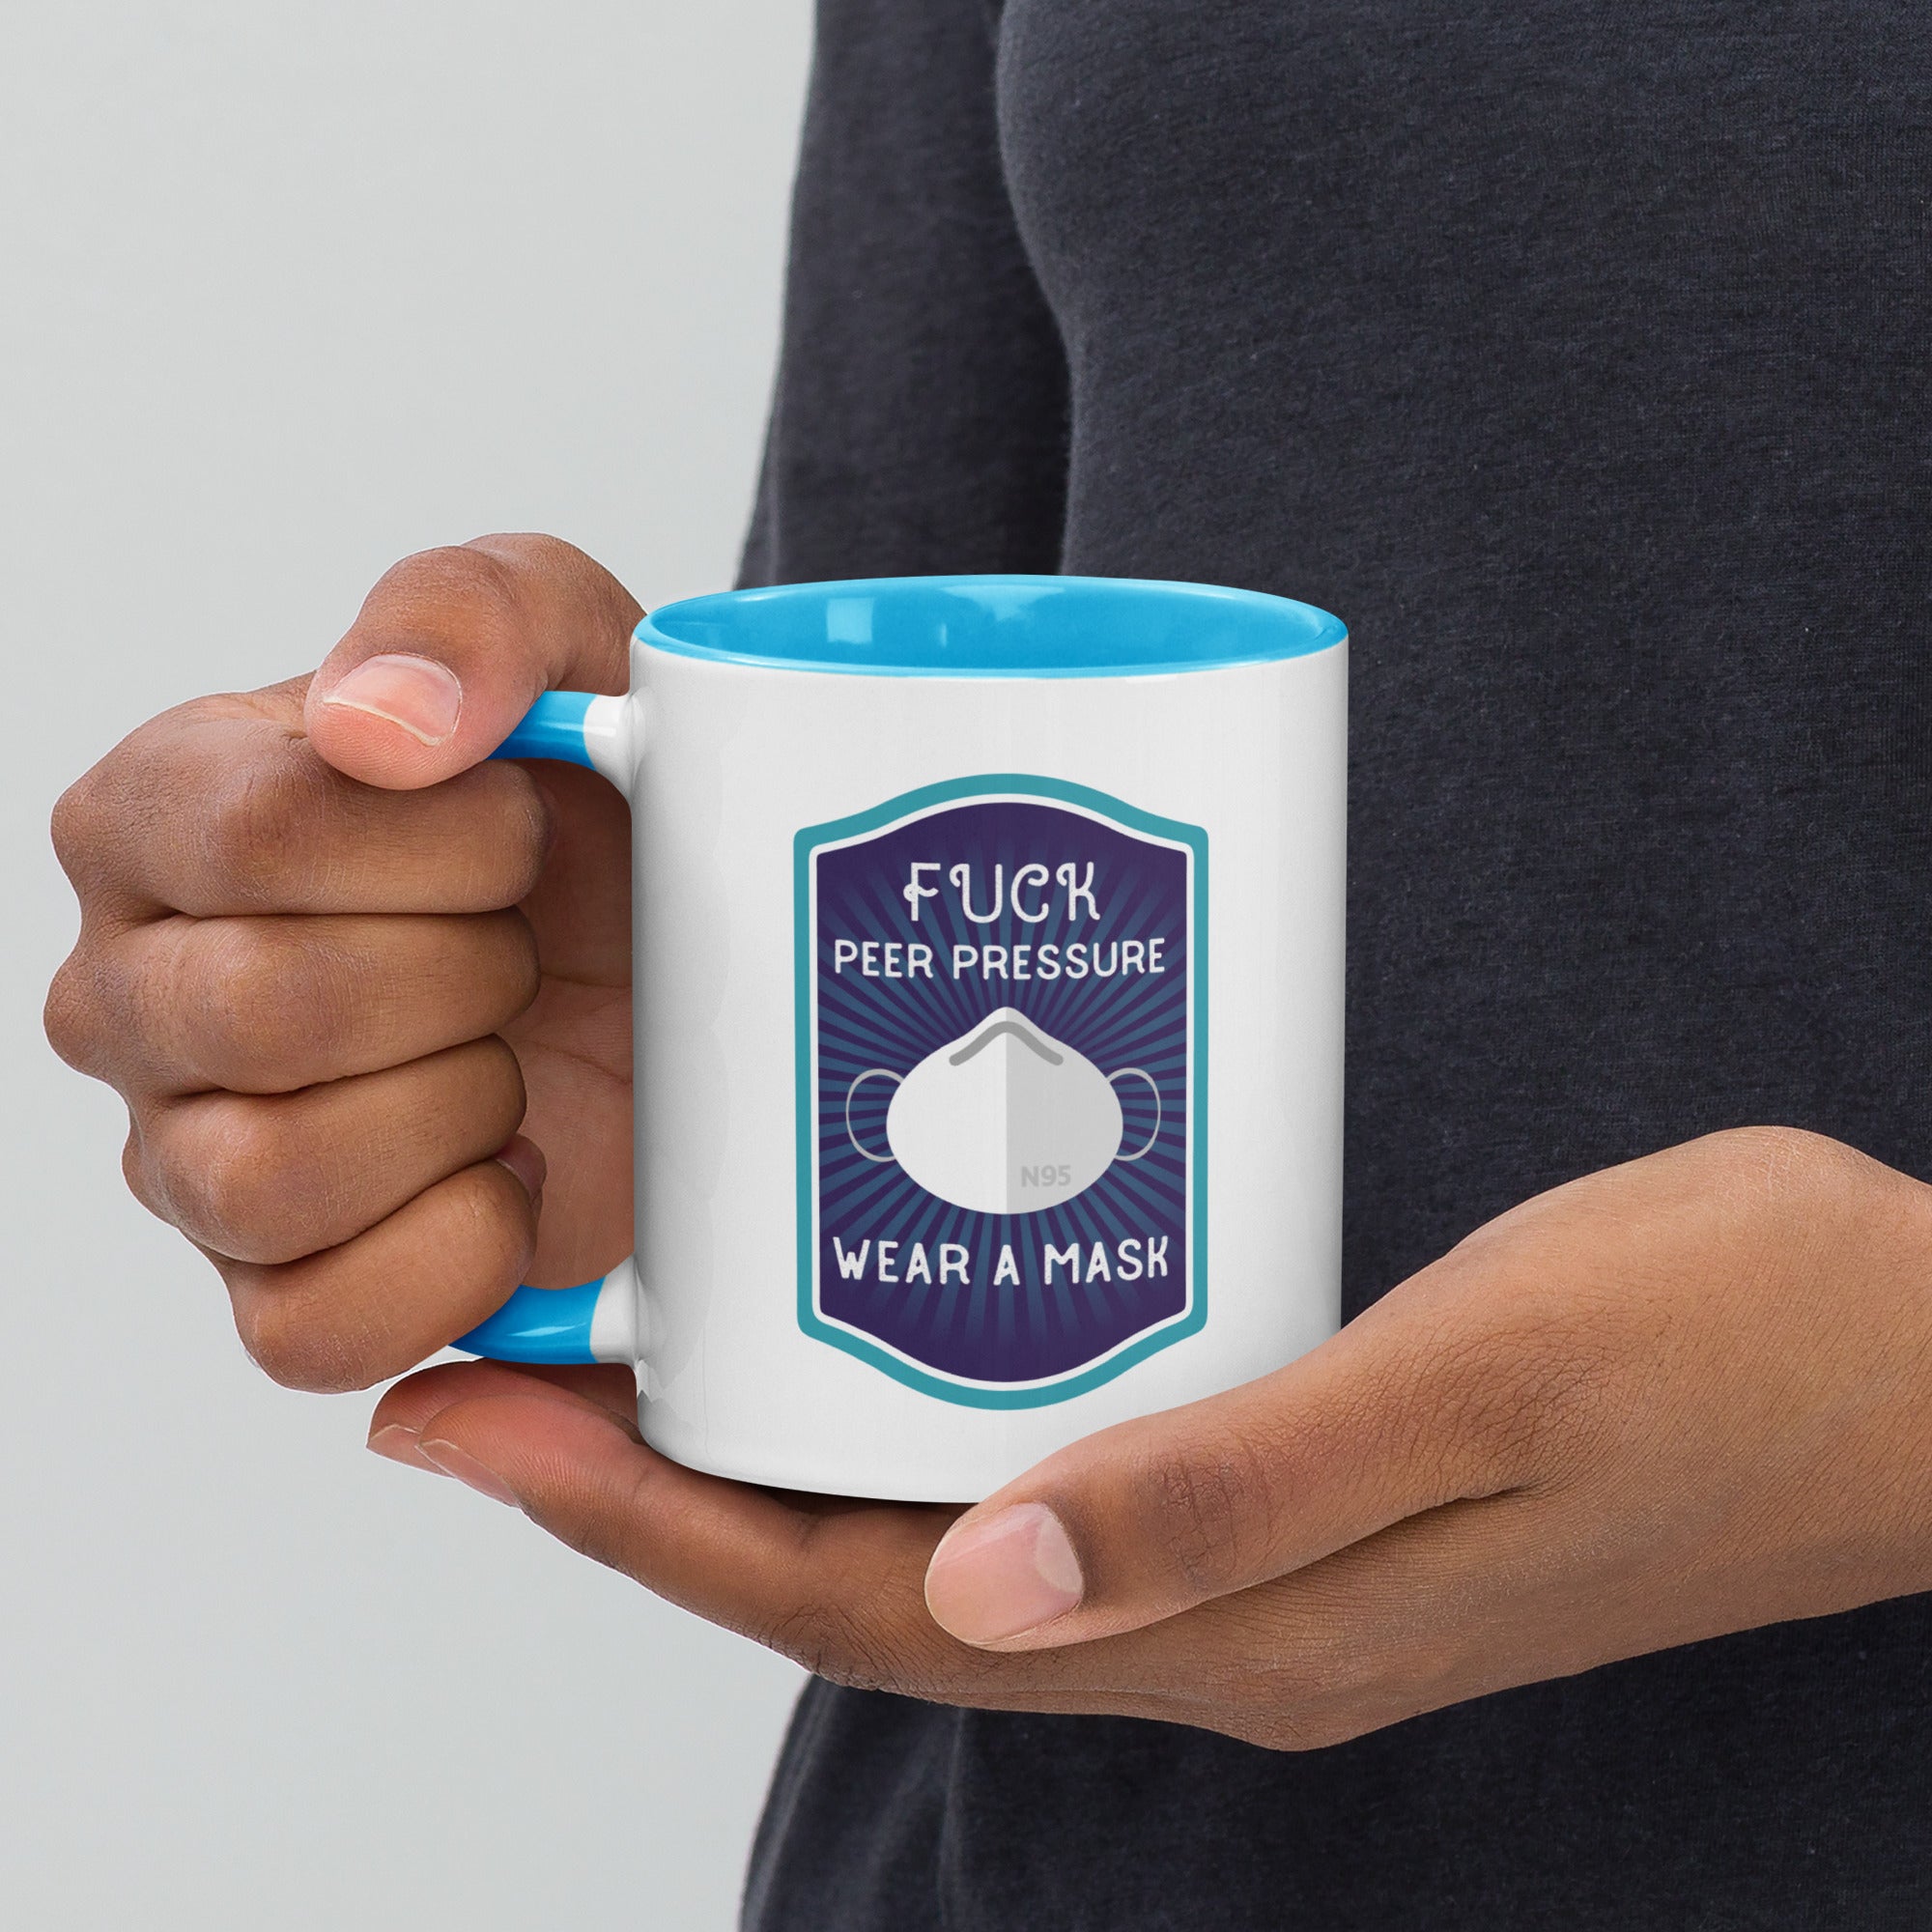 side view of Fuck peer pressure, wear a mask mug with blue interior